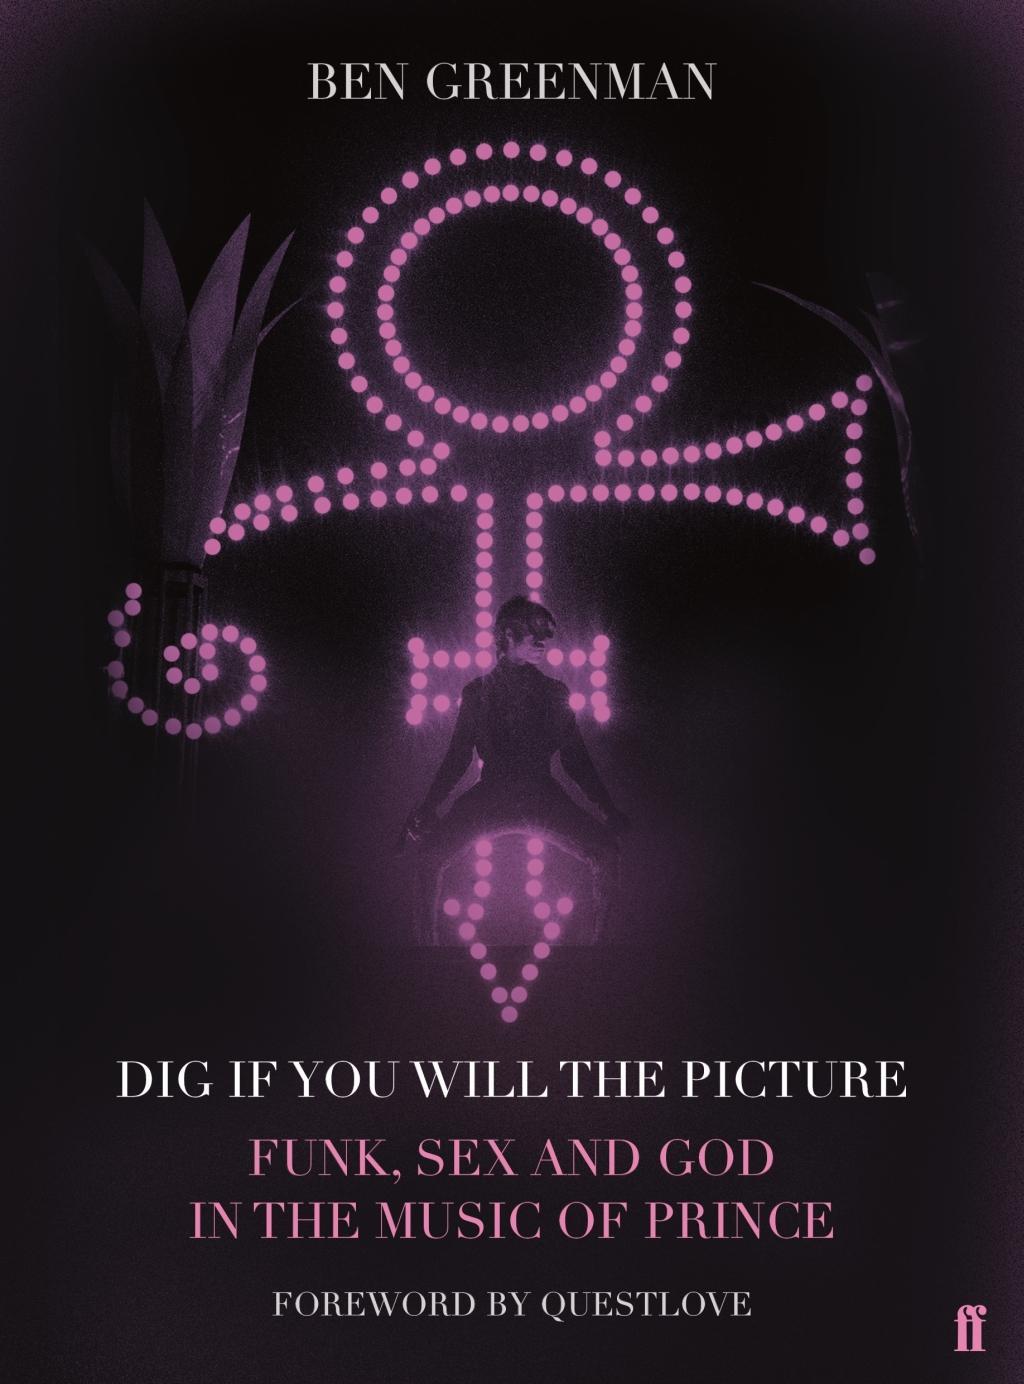 Dig If You Will The Picture / Funk, Sex and God in the Music of Prince / Ben Greenman / Buch / Gebunden / Englisch / 2017 / Faber & Faber / EAN 9780571333264 - Greenman, Ben